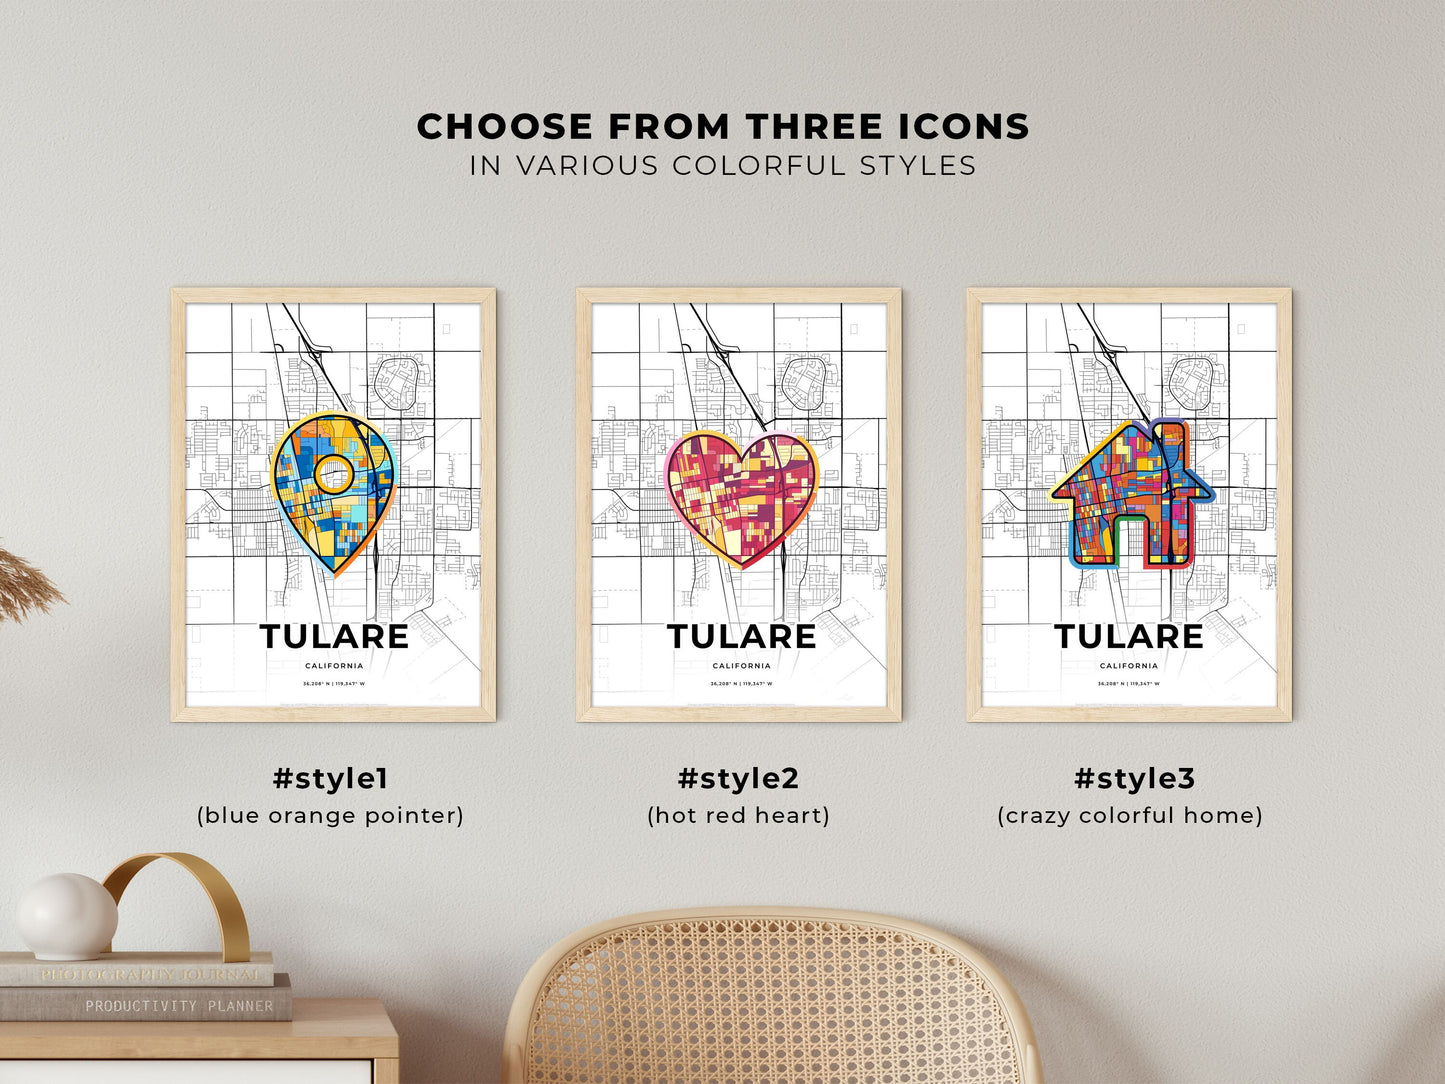 TULARE CALIFORNIA minimal art map with a colorful icon. Where it all began, Couple map gift.